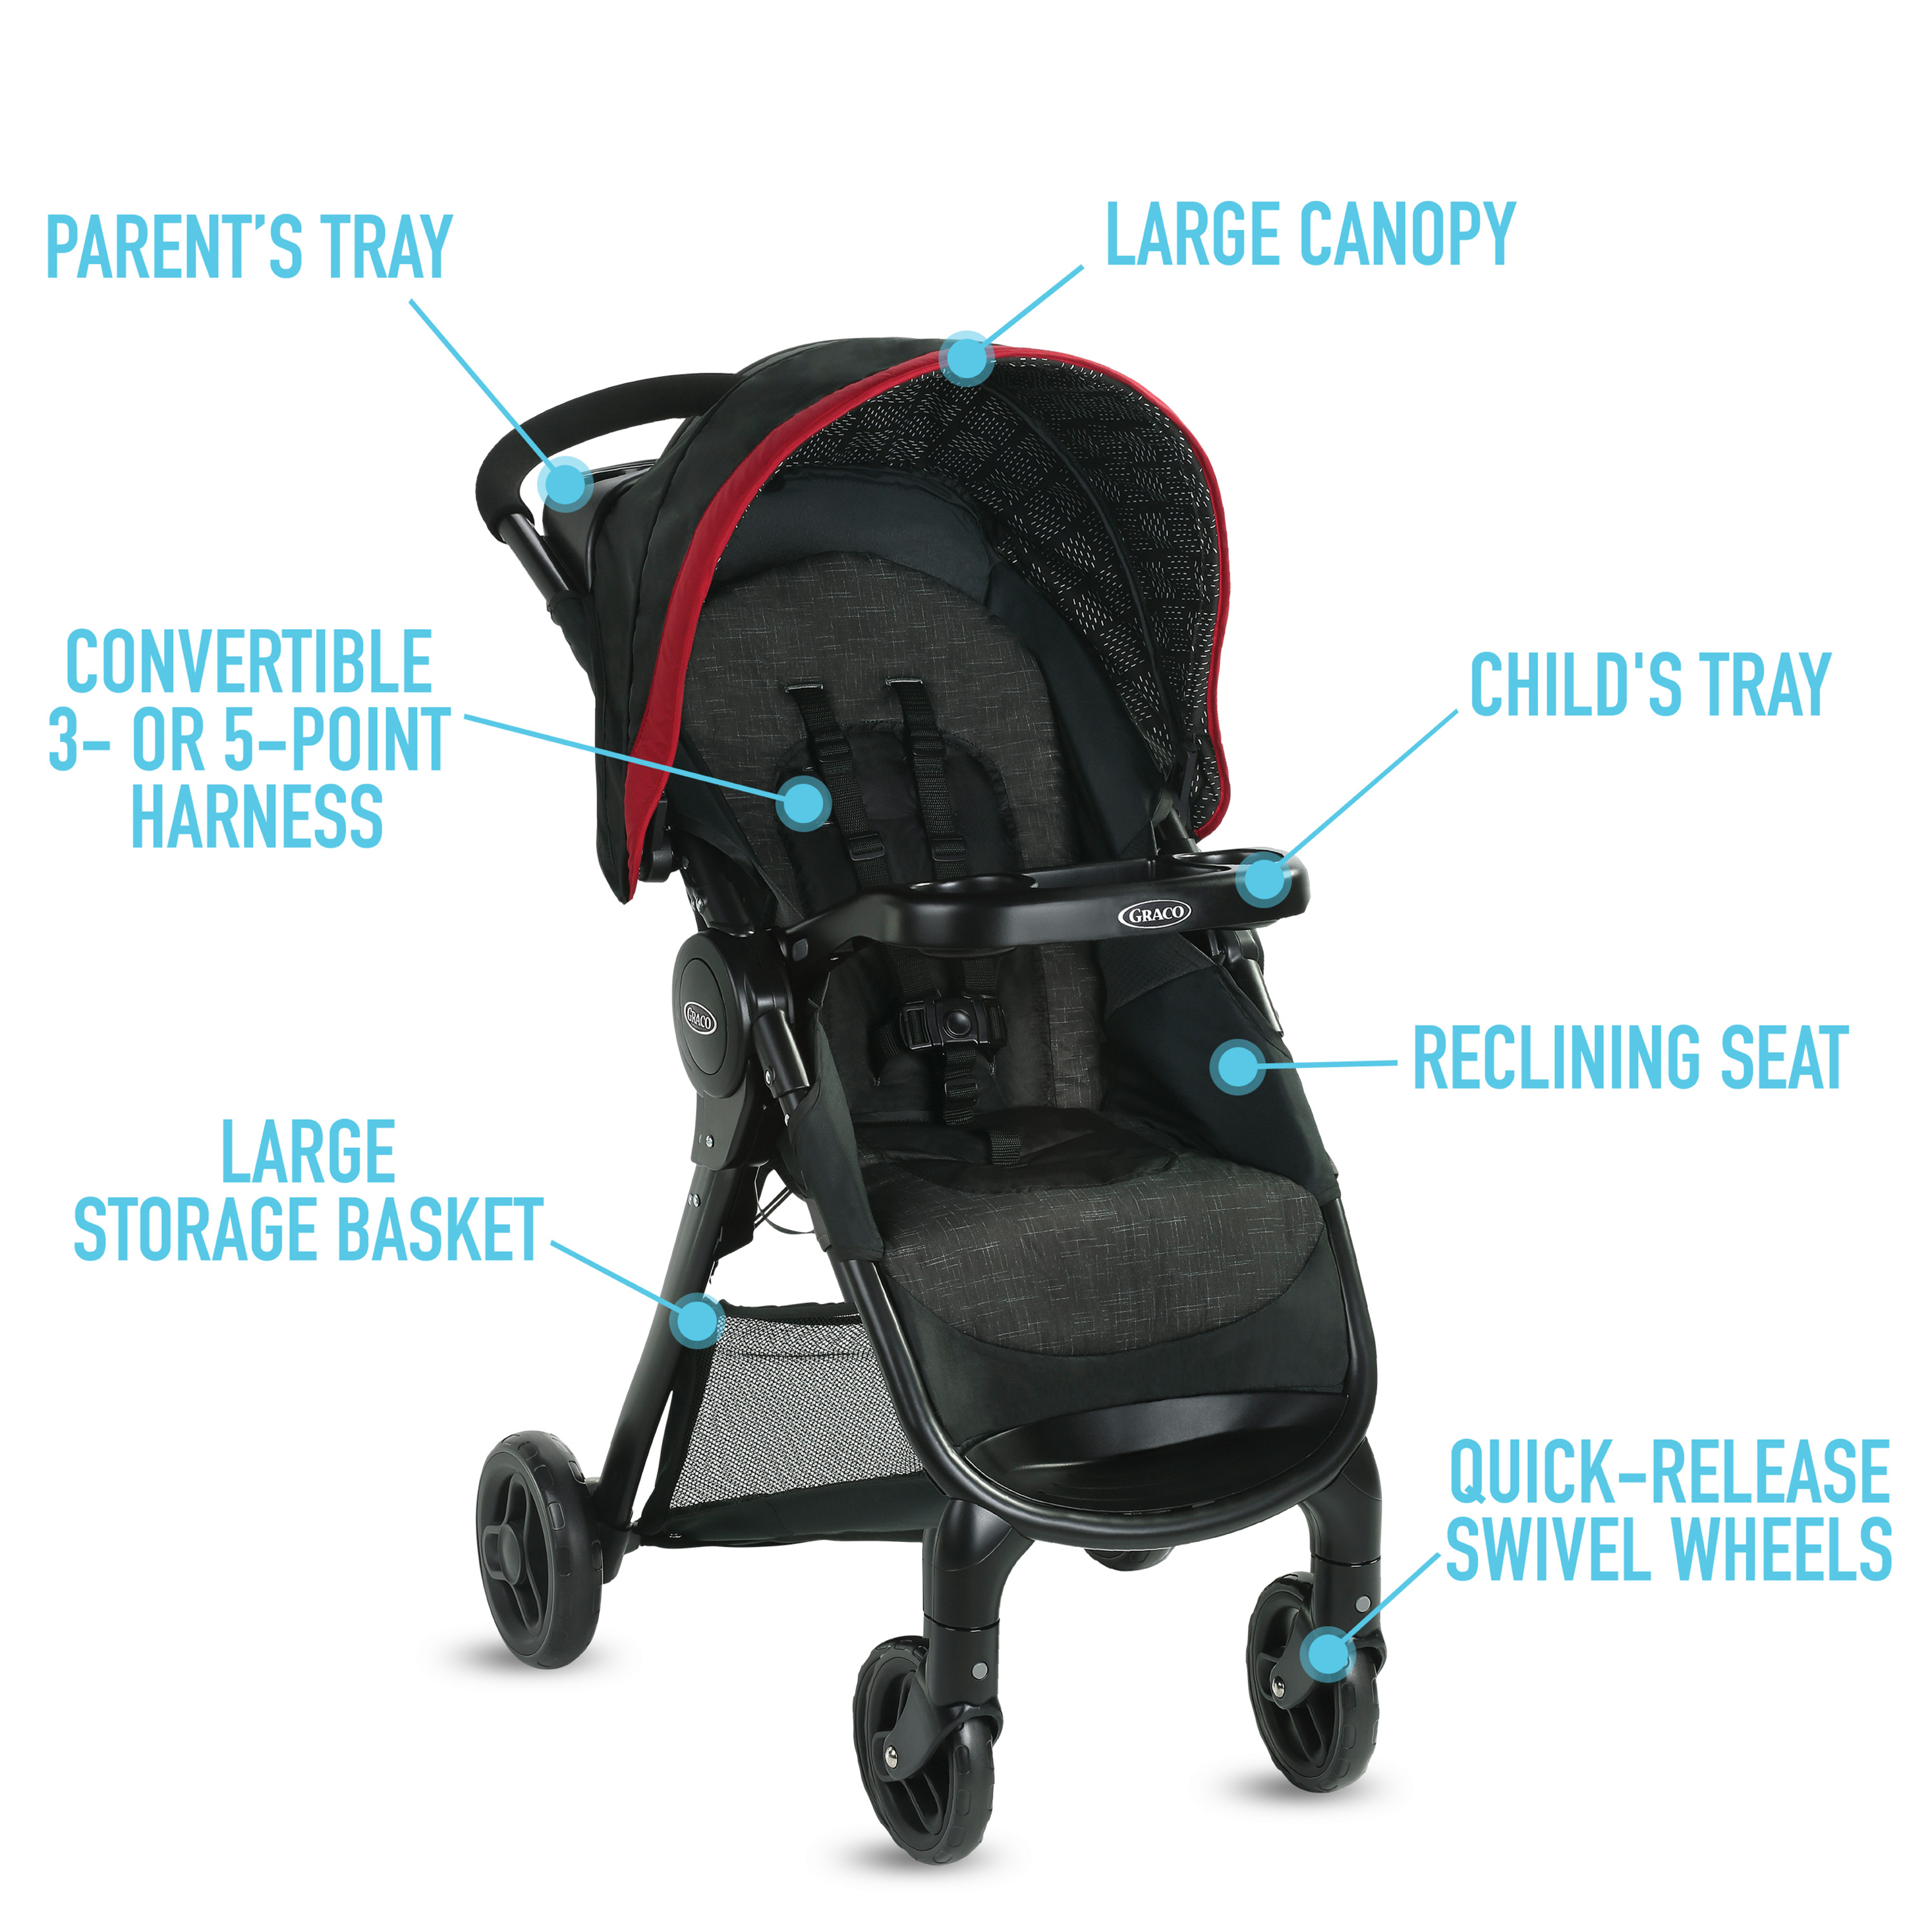 fastaction travel system with snugride 30